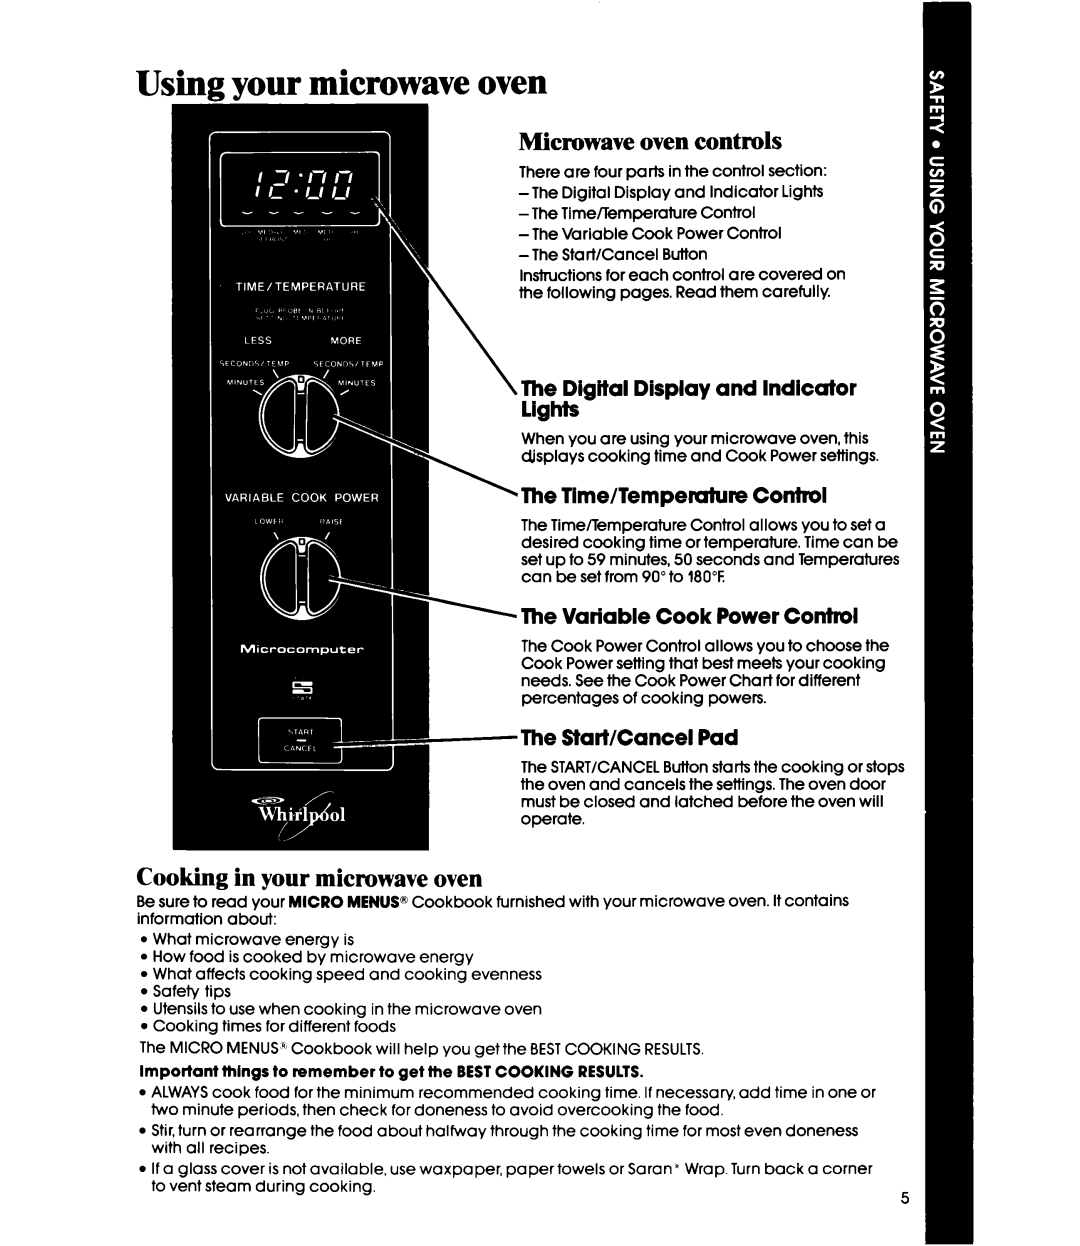 Whirlpool Microwace Oven manual Sing your microwave oven, Microwave oven controls, Cooking in your microwave oven 